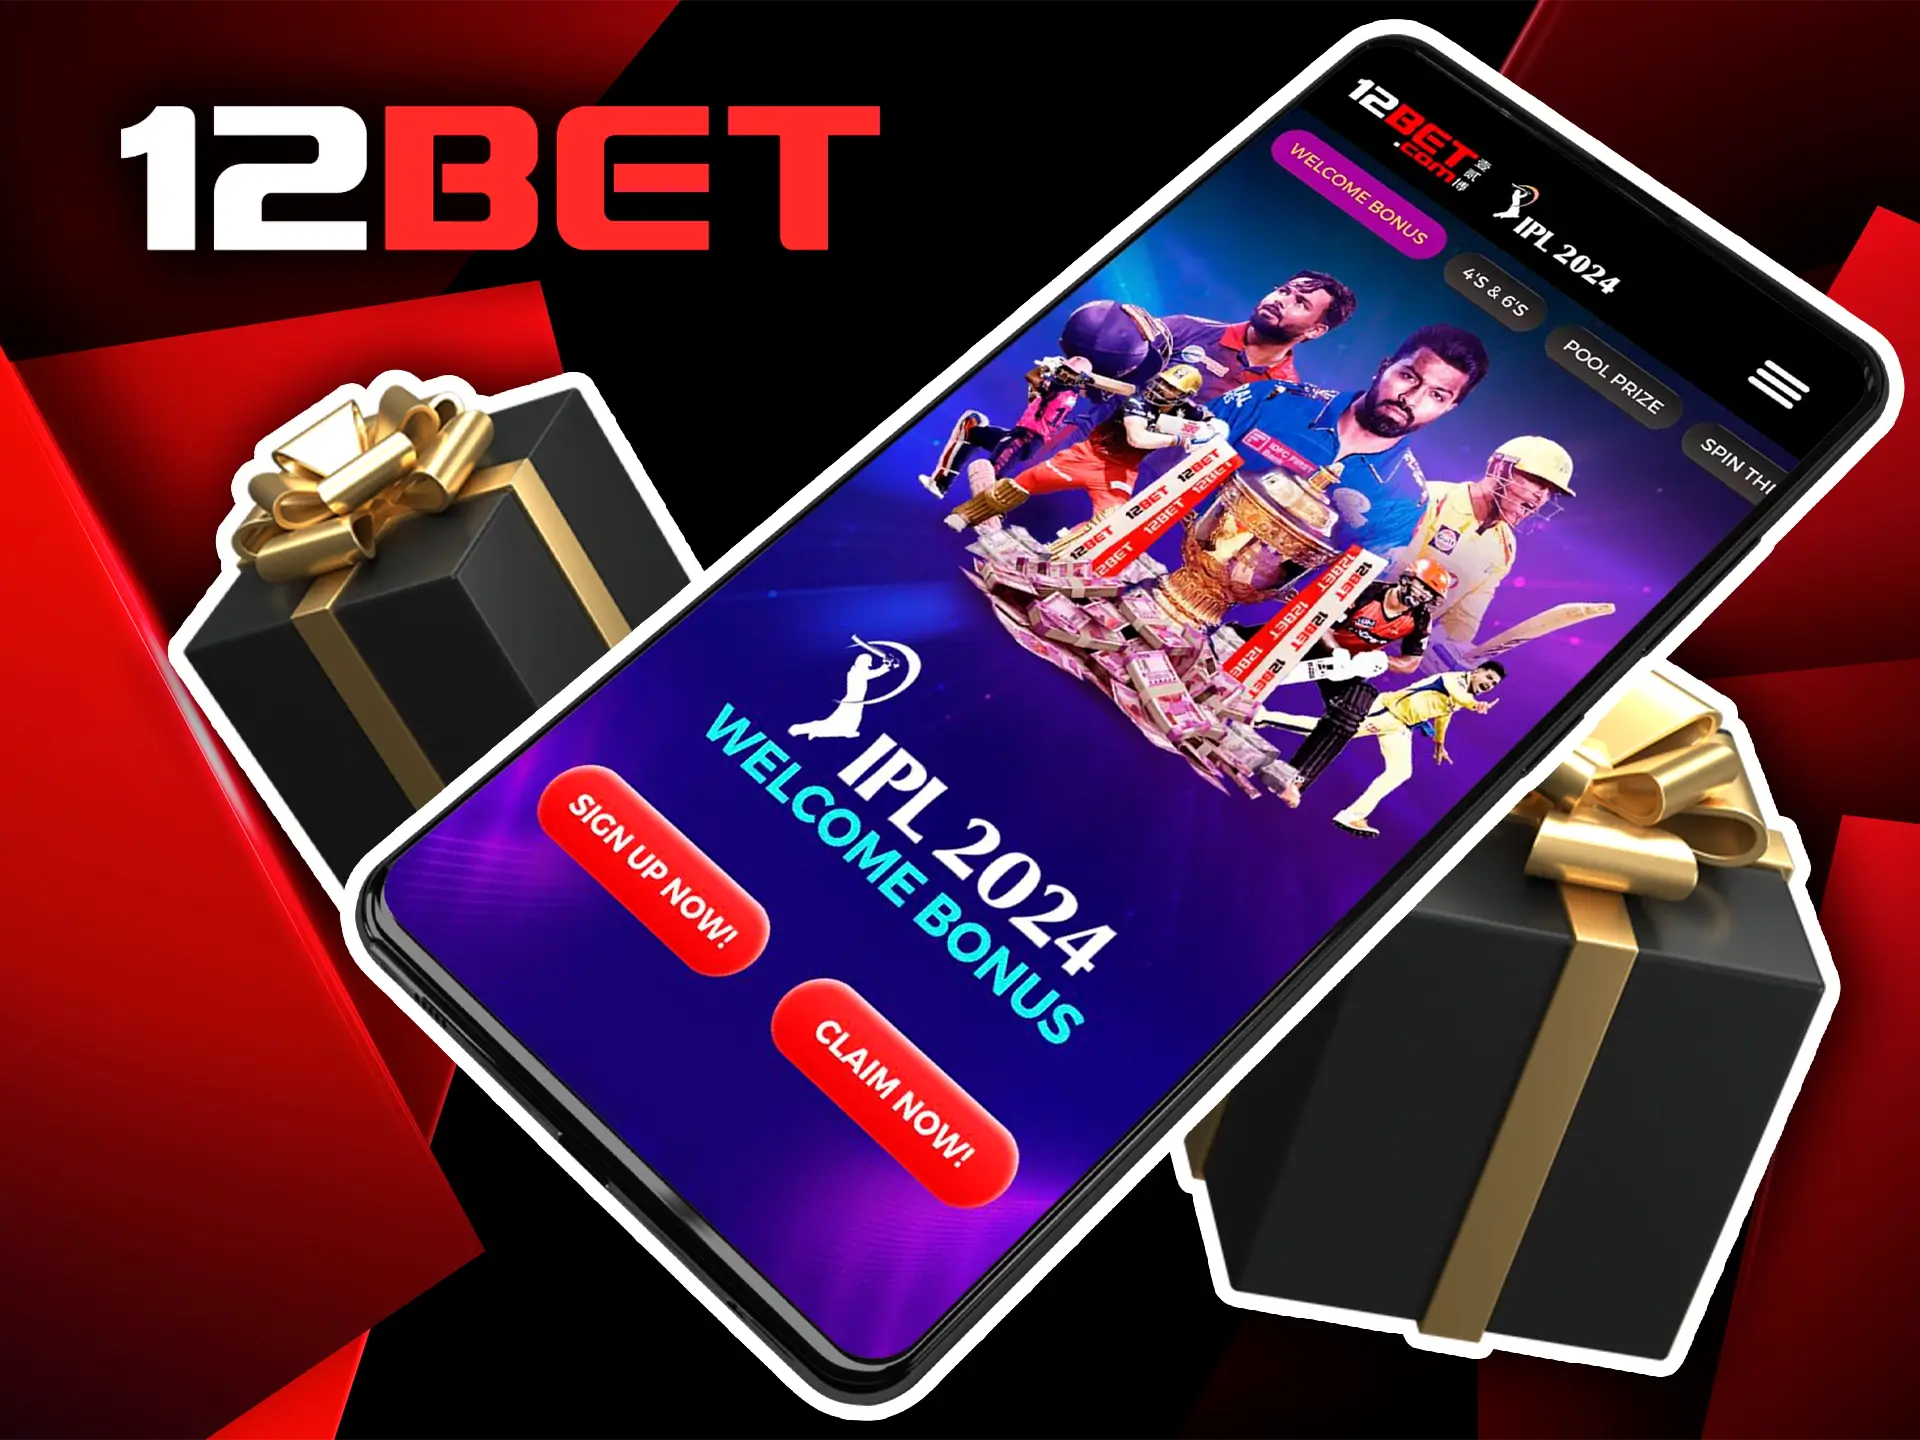 Use 12Bet's welcome bonus to increase your chances of winning, as well as increase your deposit.